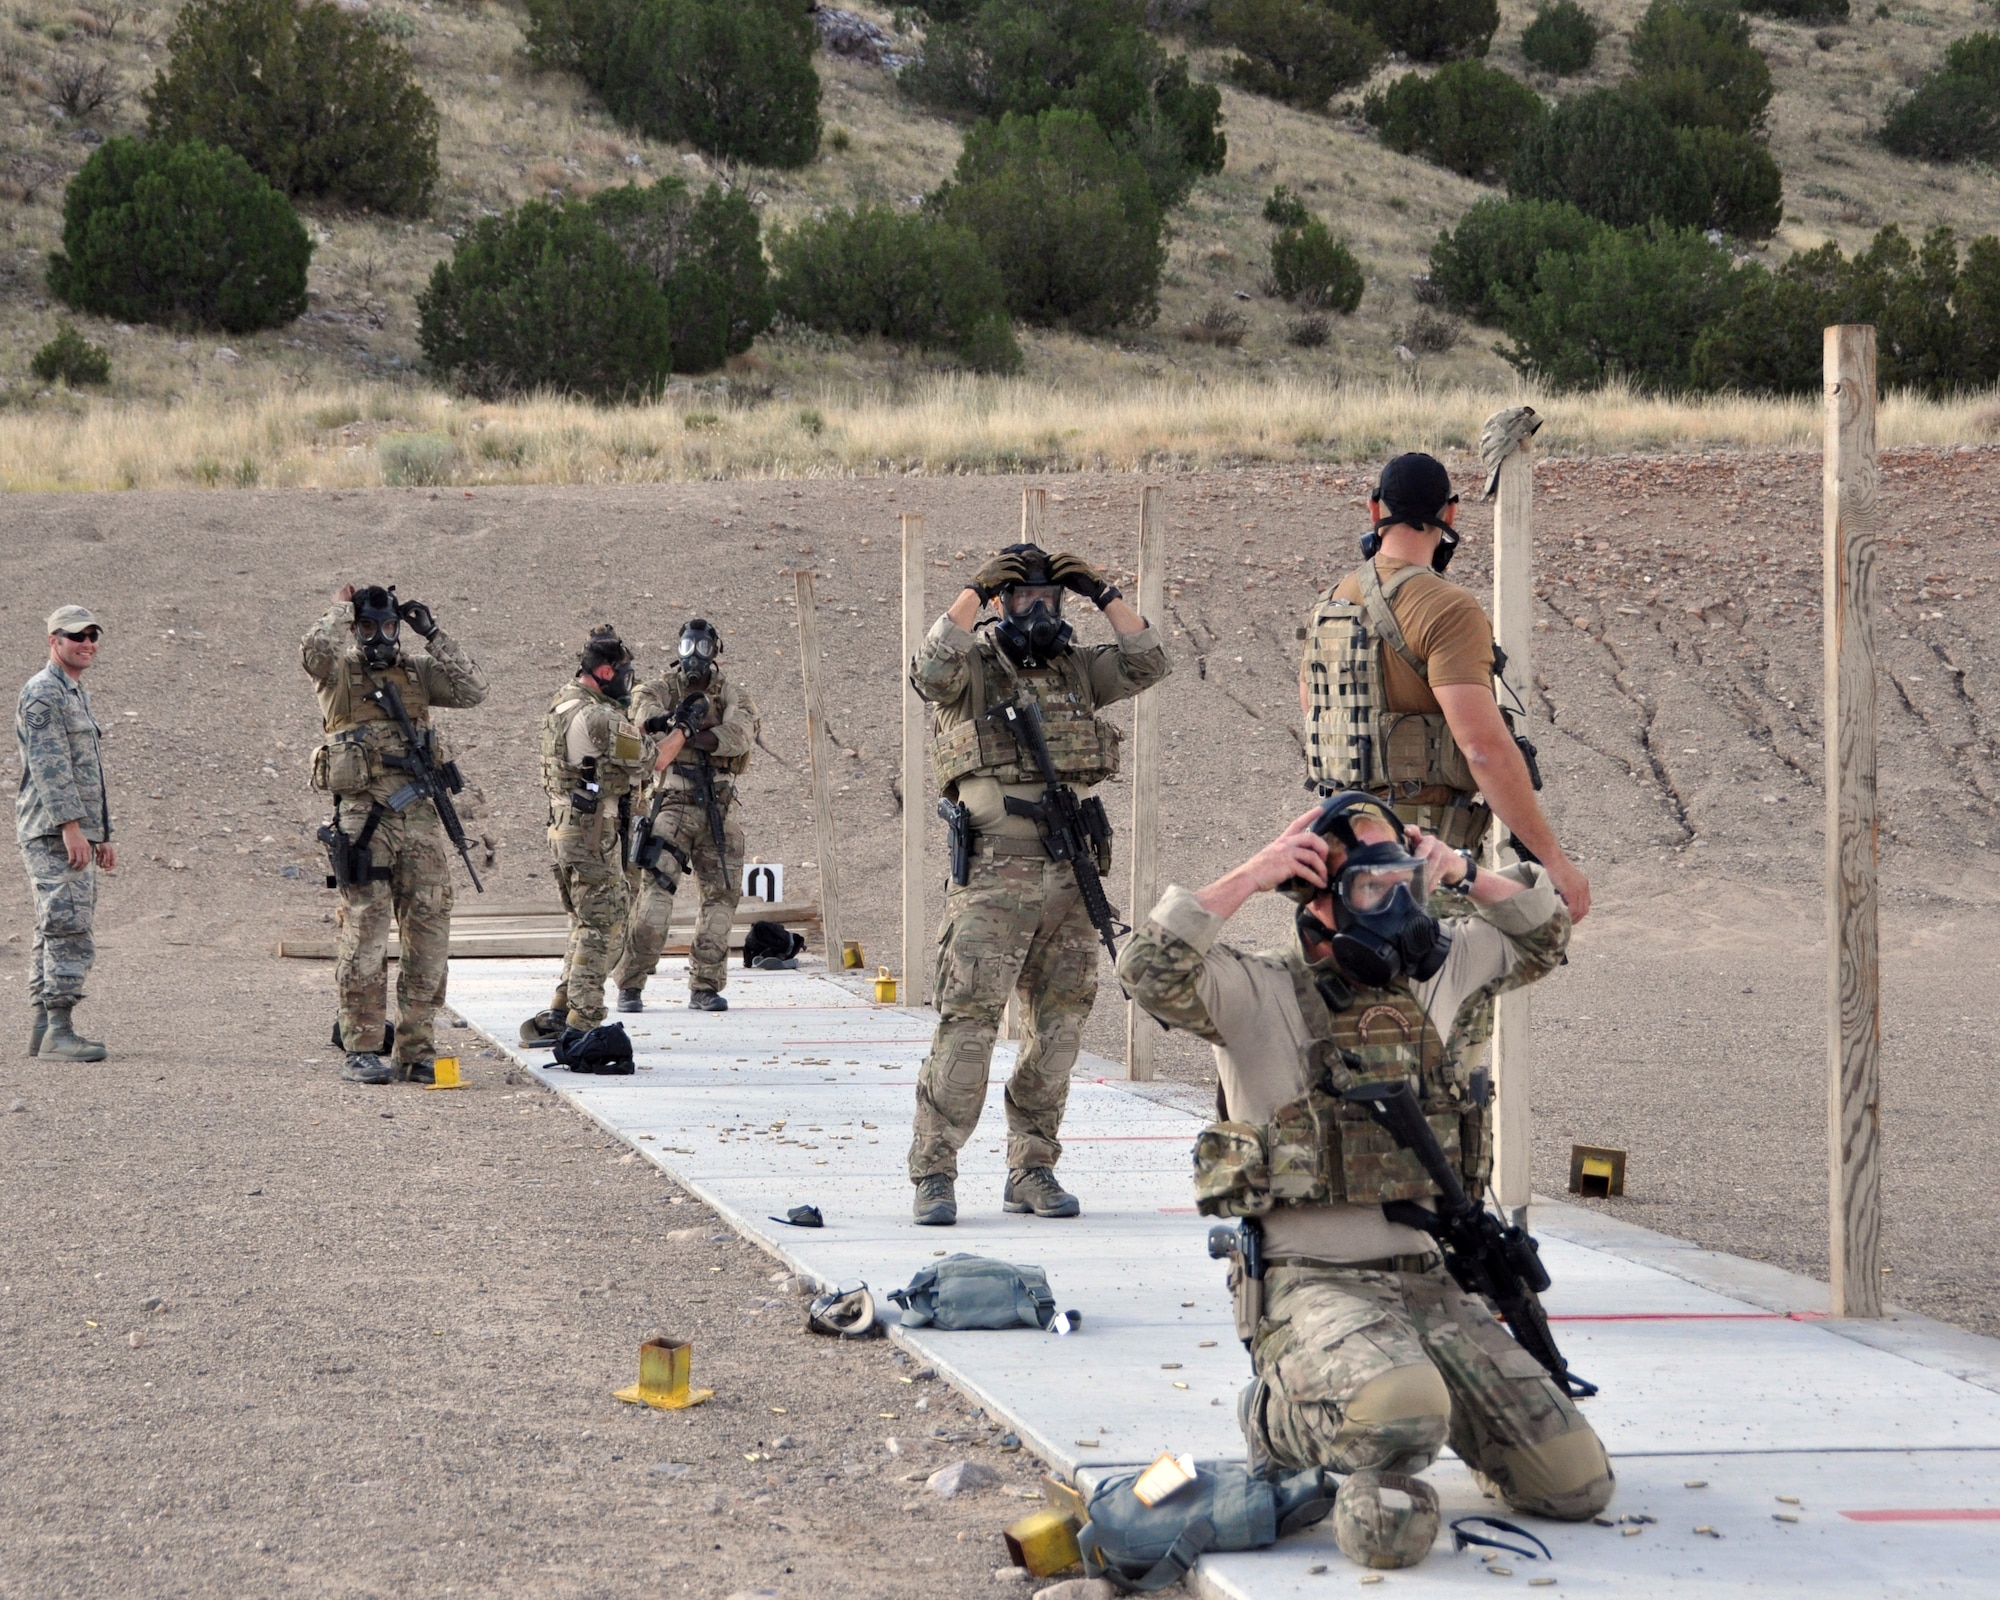 Pararesumen don their gas masks before a shooting drill during the 2014 Guardian Angel Rodeo, Kirtland Air Force Base, New Mexico, September 24, 2014. The rodeo, or competition, was a week-long event that tested the PJs on land navigation skills, high-angel rope rescues, survival techniques, medical skills, weapons operations and overall physical endurance. (U.S. Air Force photo/ Tech. Sgt. Katie Spencer)  